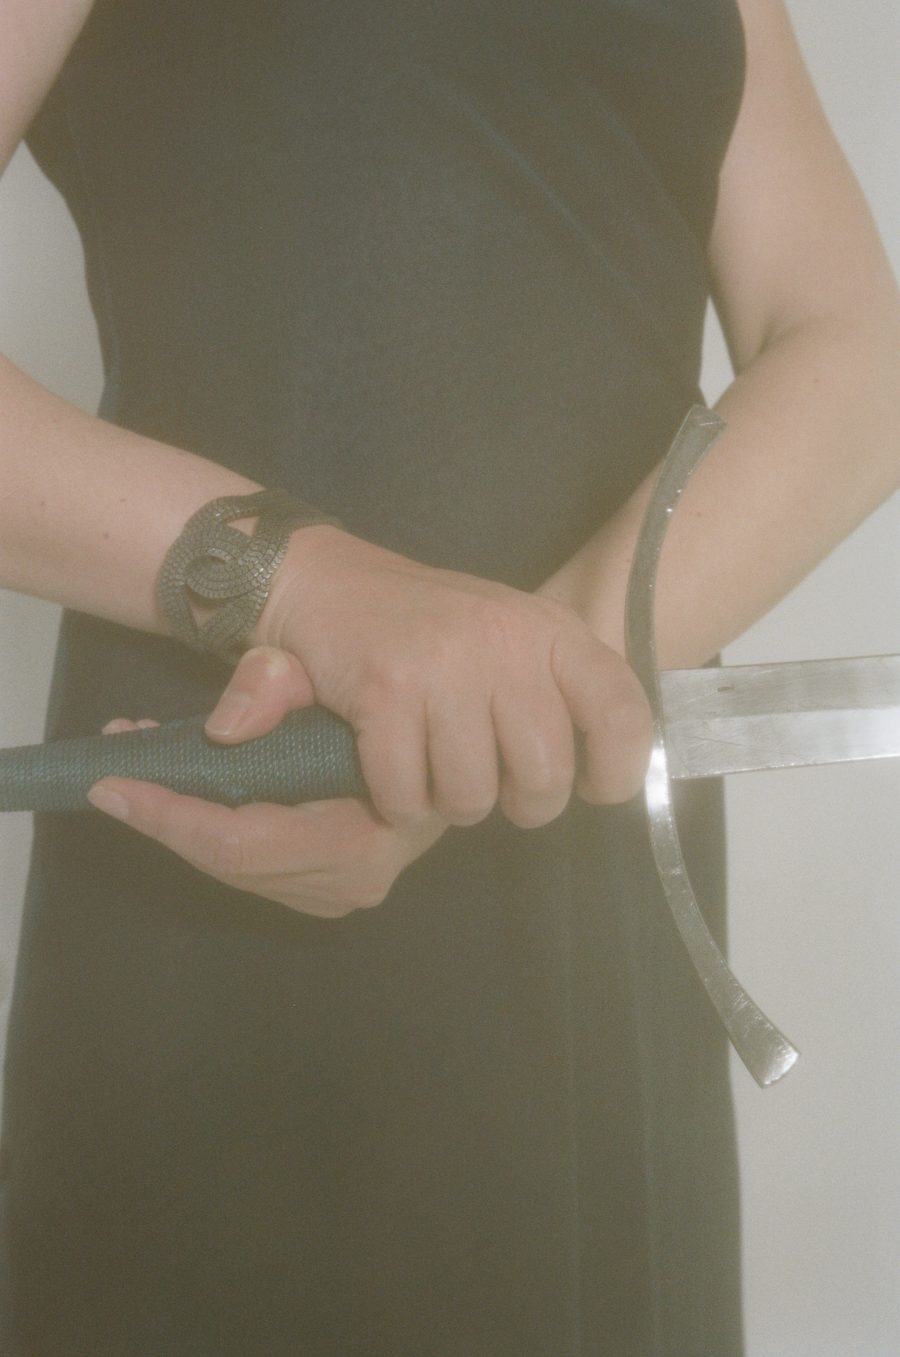 A close-up of Imogen's hands holding a sword. From Foreground: Portraits of Older Transgender and Gender Diverse People